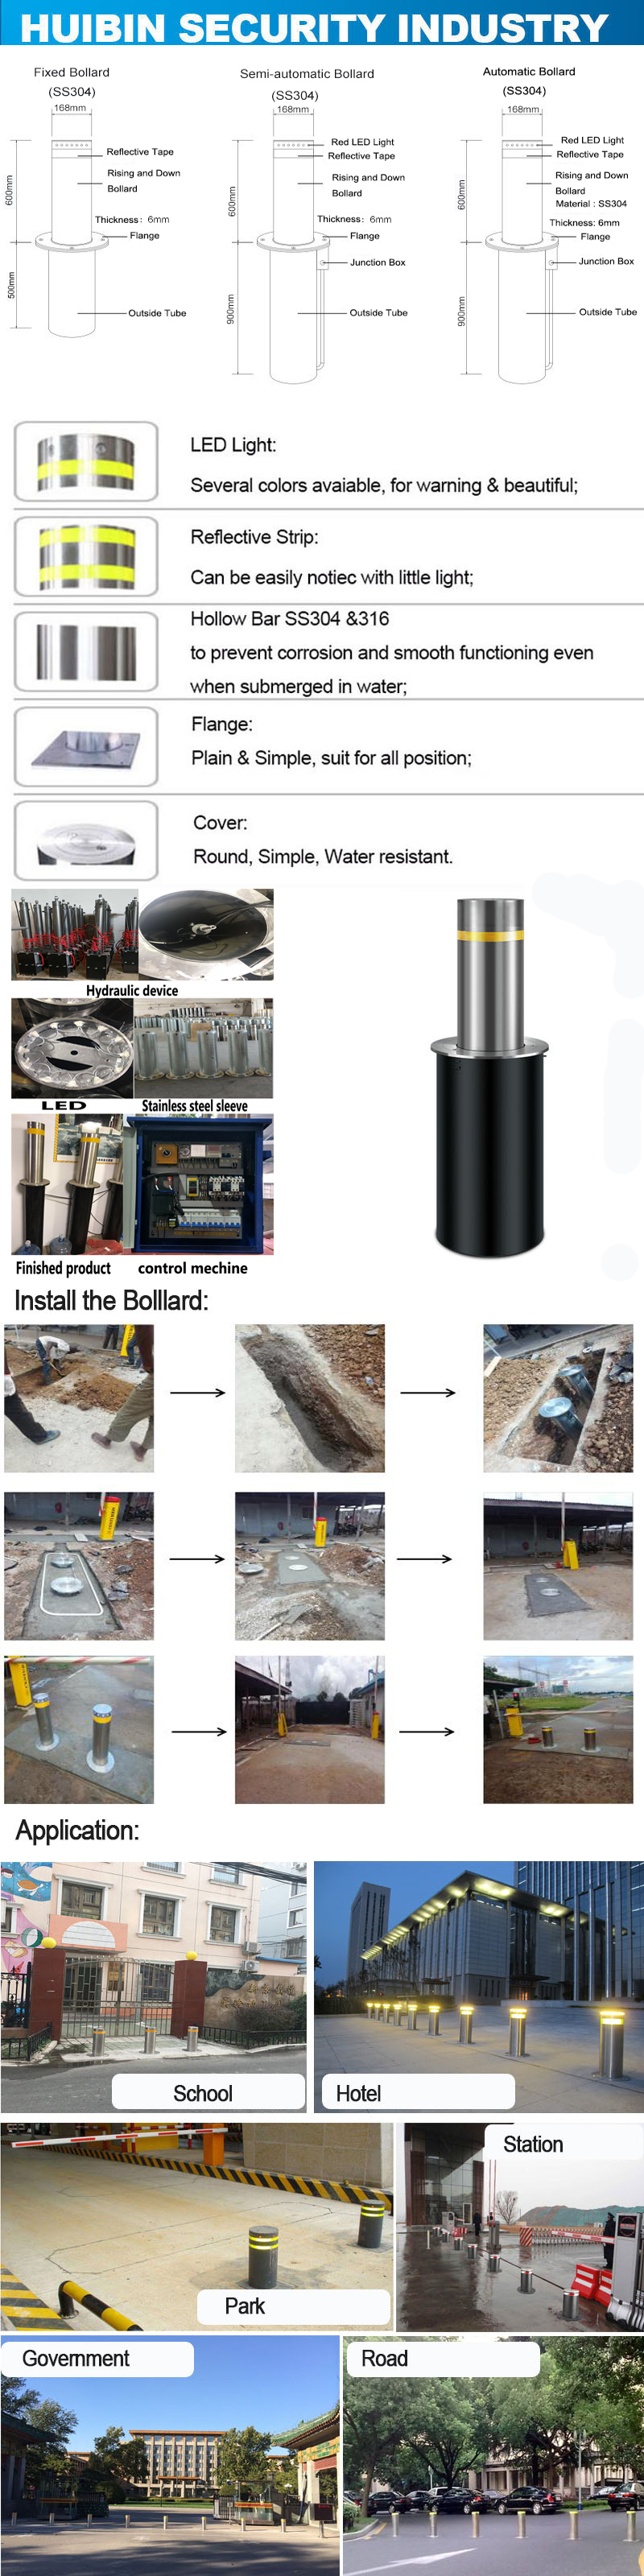 Road Safety Equipment Hydraulic Lifting Bollards for Reflective Tape